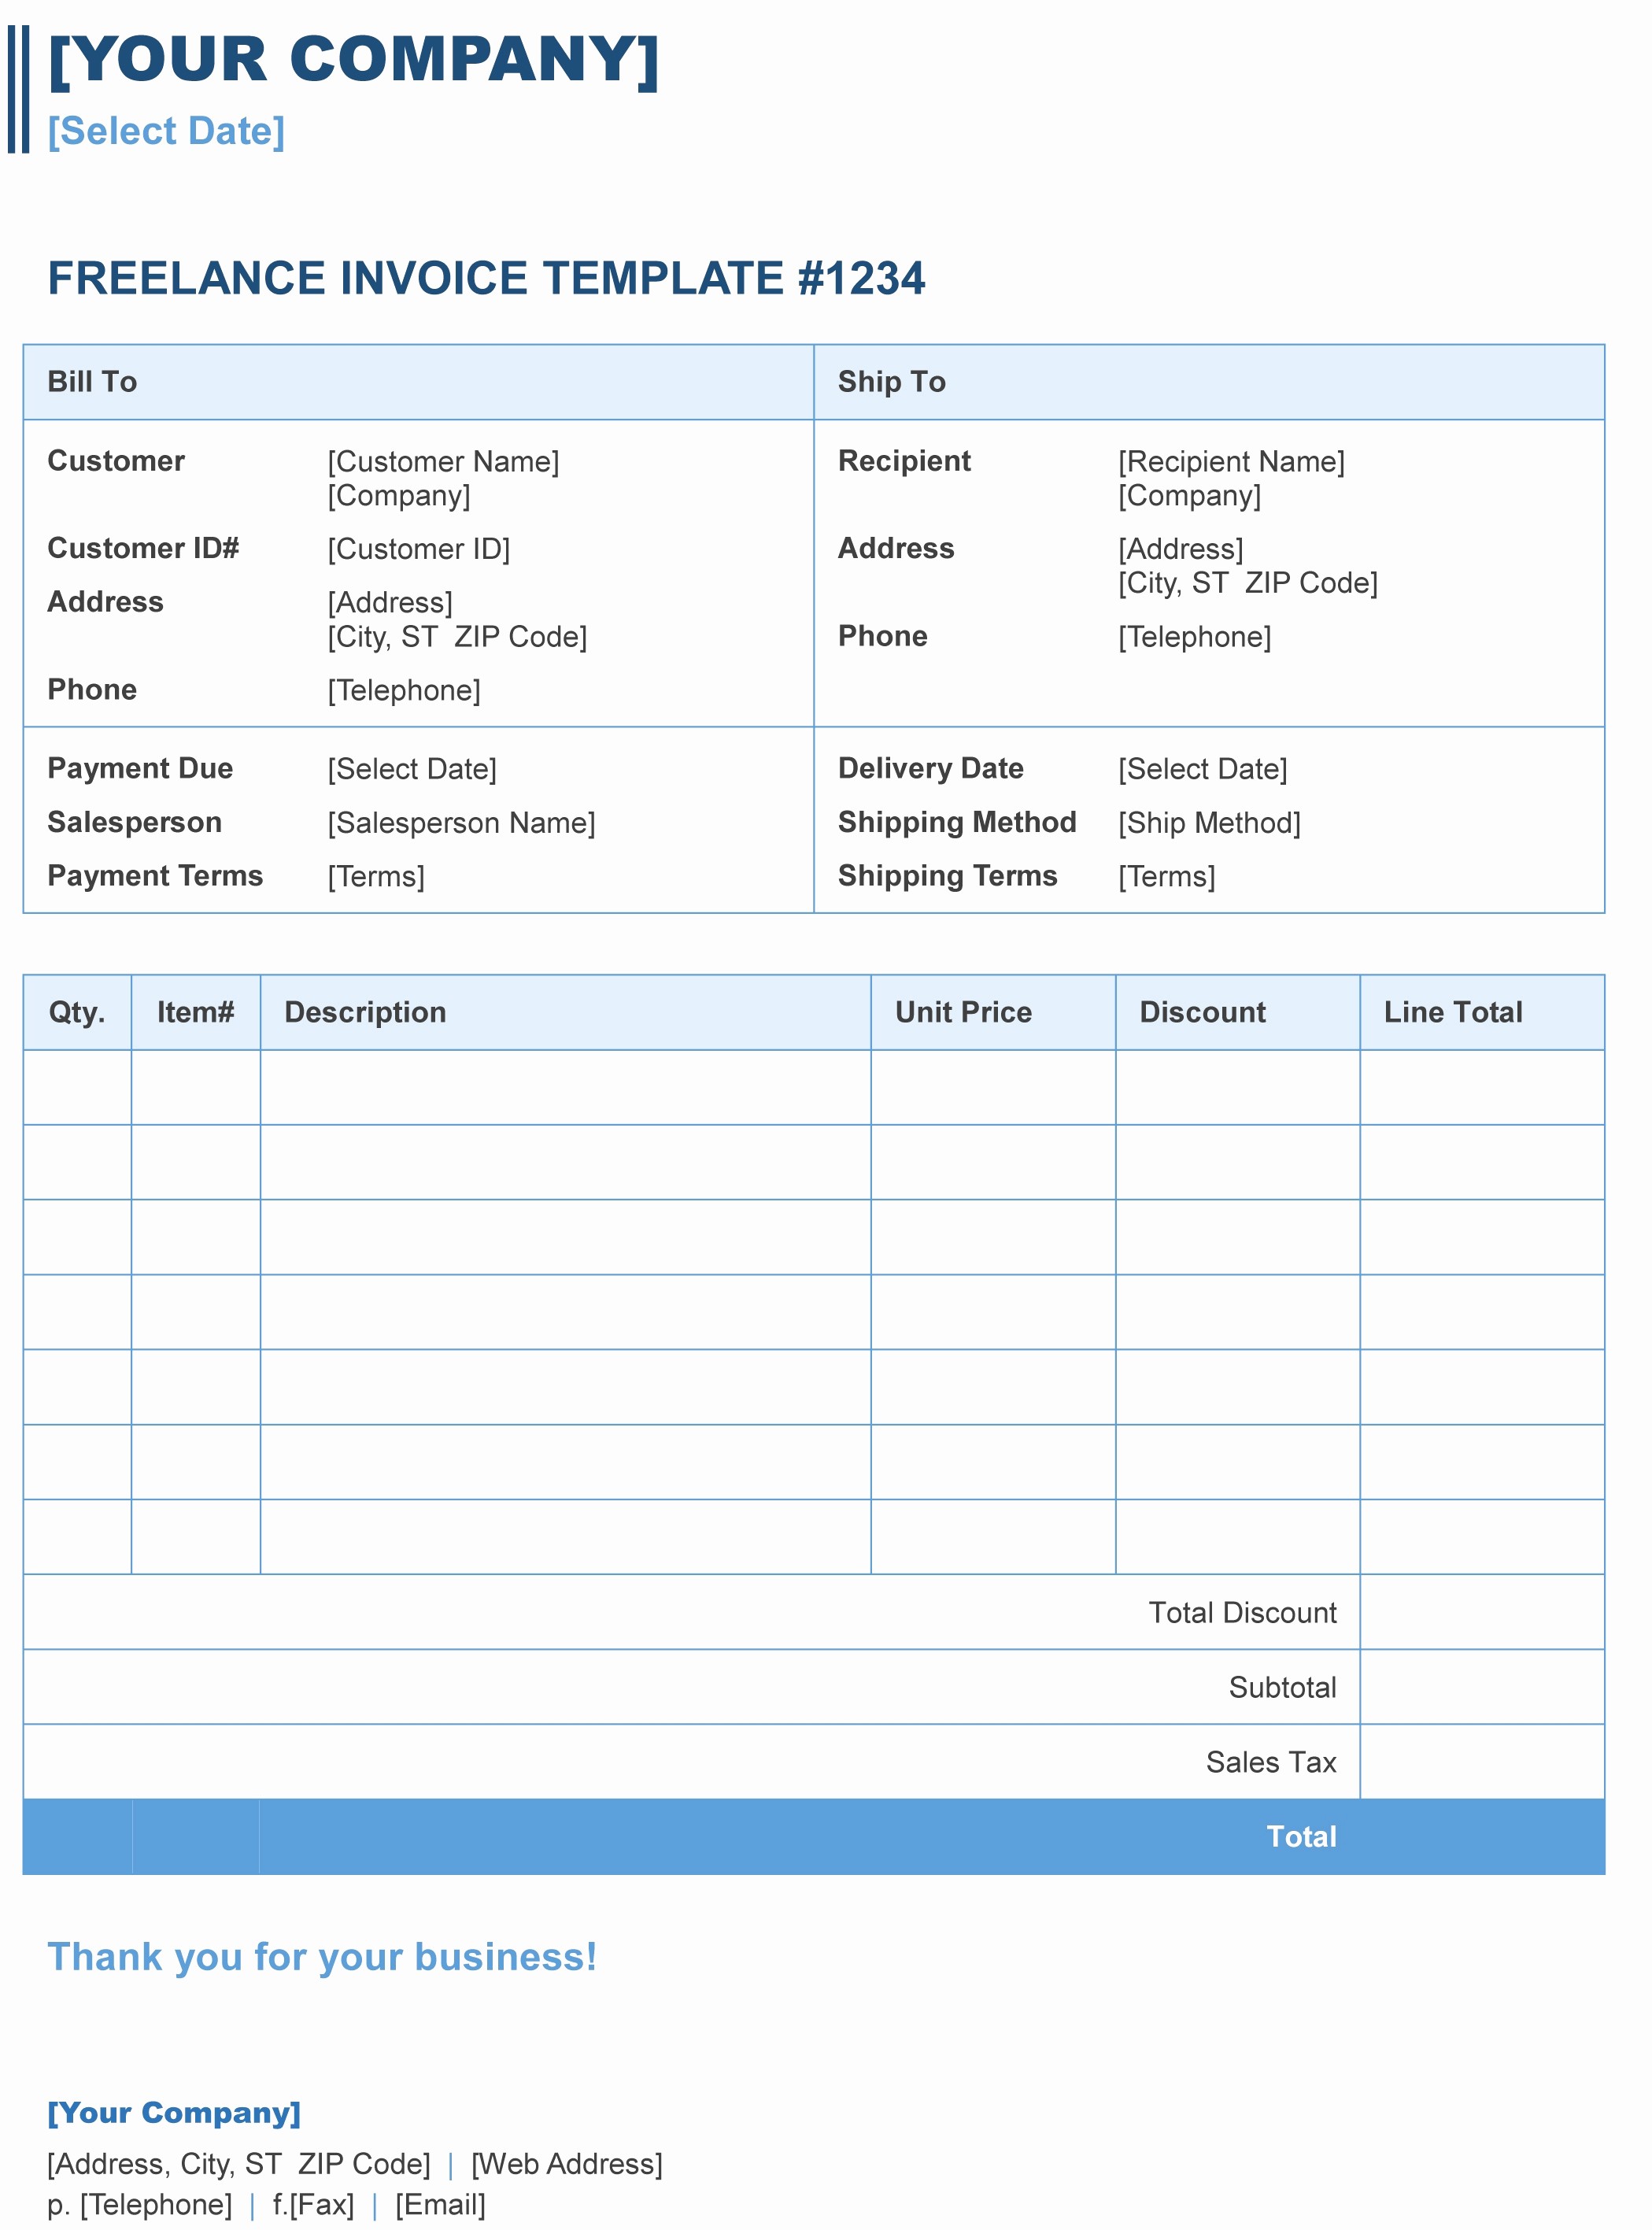 Free Invoice format In Word Awesome Freelance Invoice Template Excel